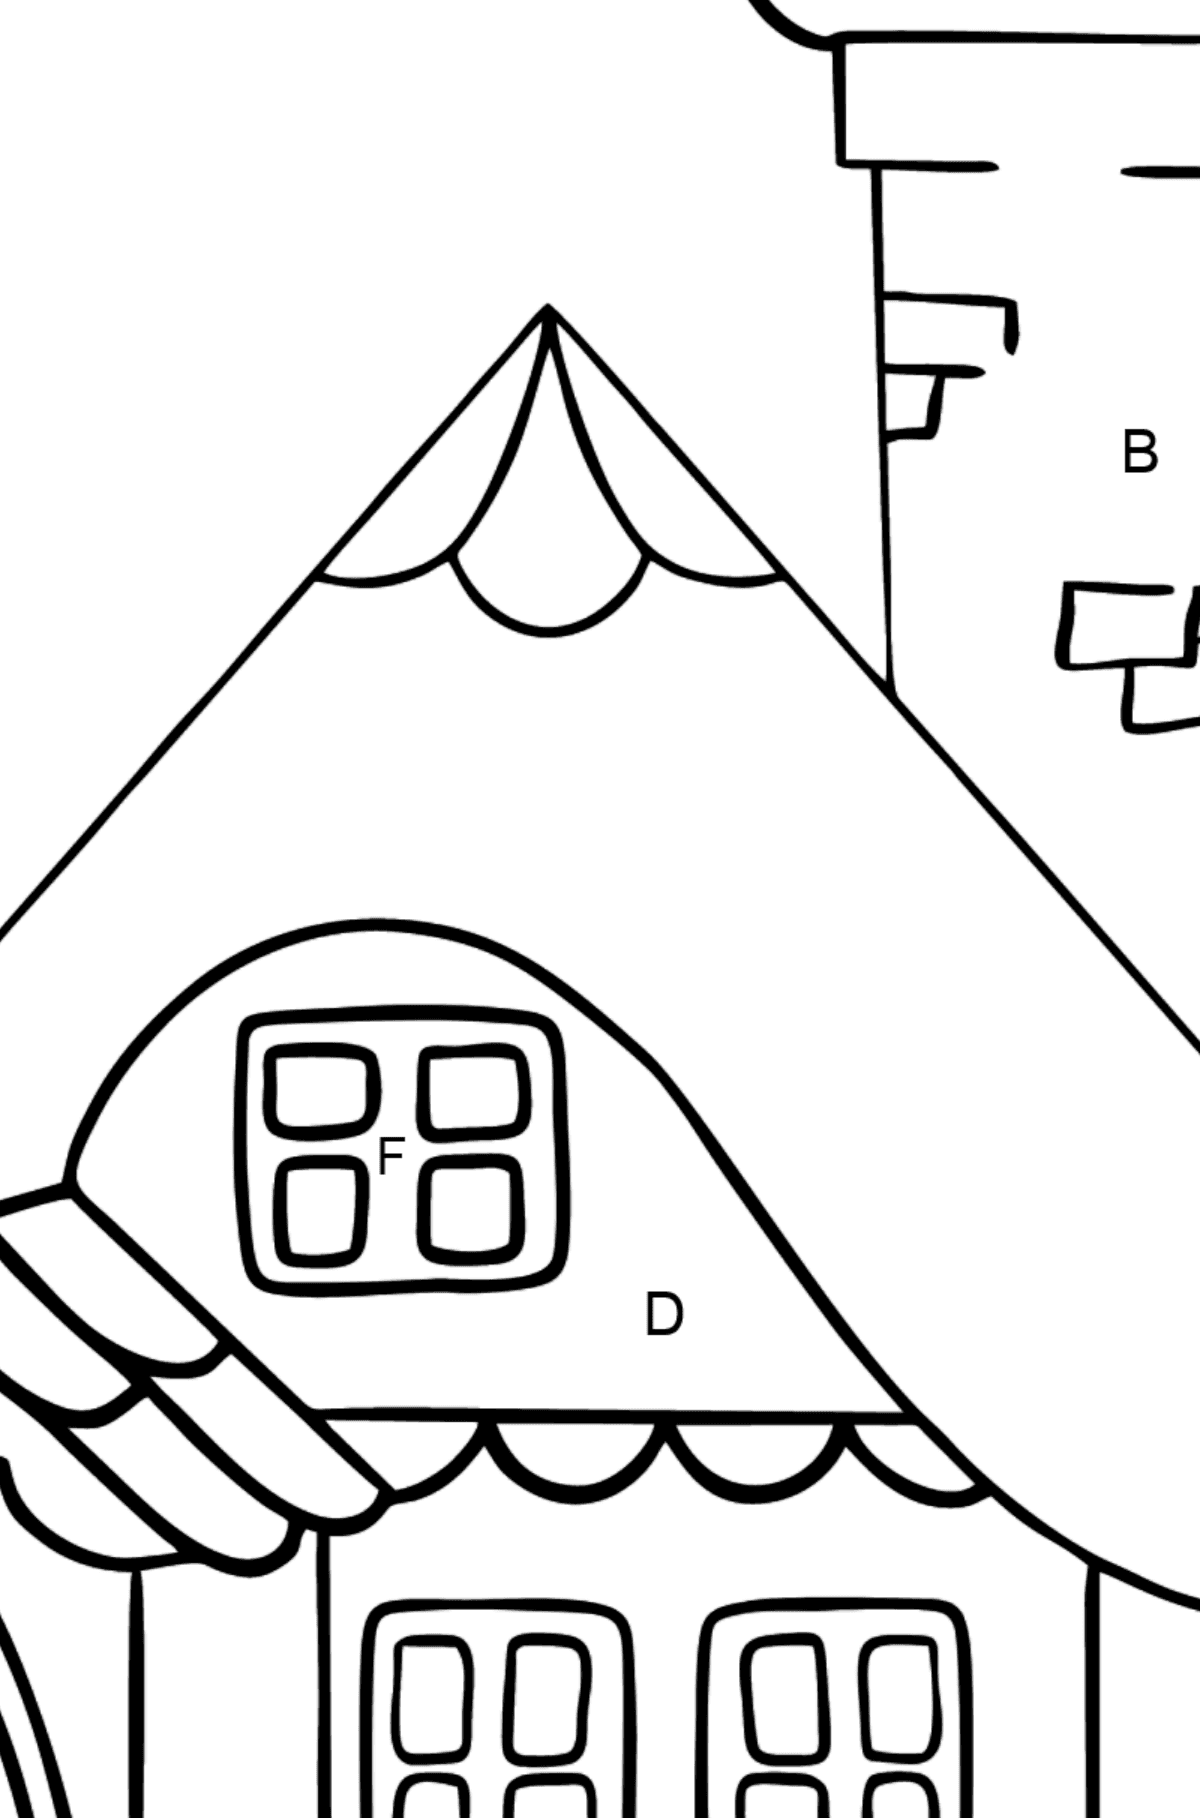 Simple Coloring Page - A Wonderful House - Coloring by Letters for Kids